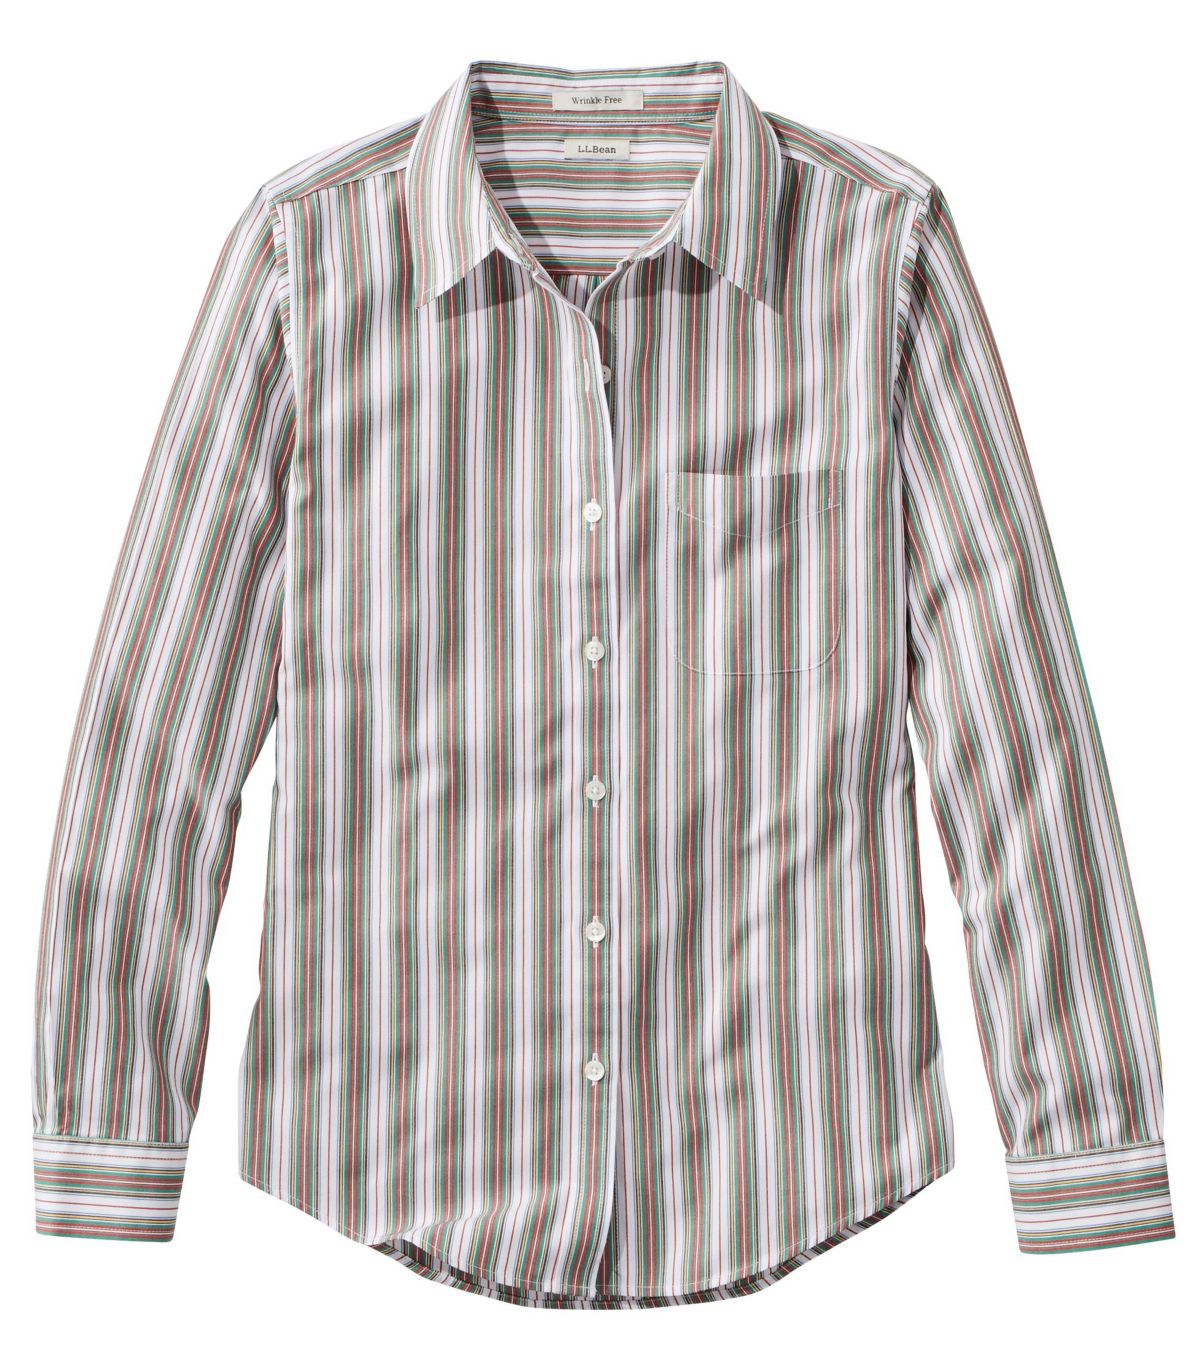 Women's Wrinkle-Free Pinpoint Oxford Shirt, Long-Sleeve Relaxed Fit Stripe